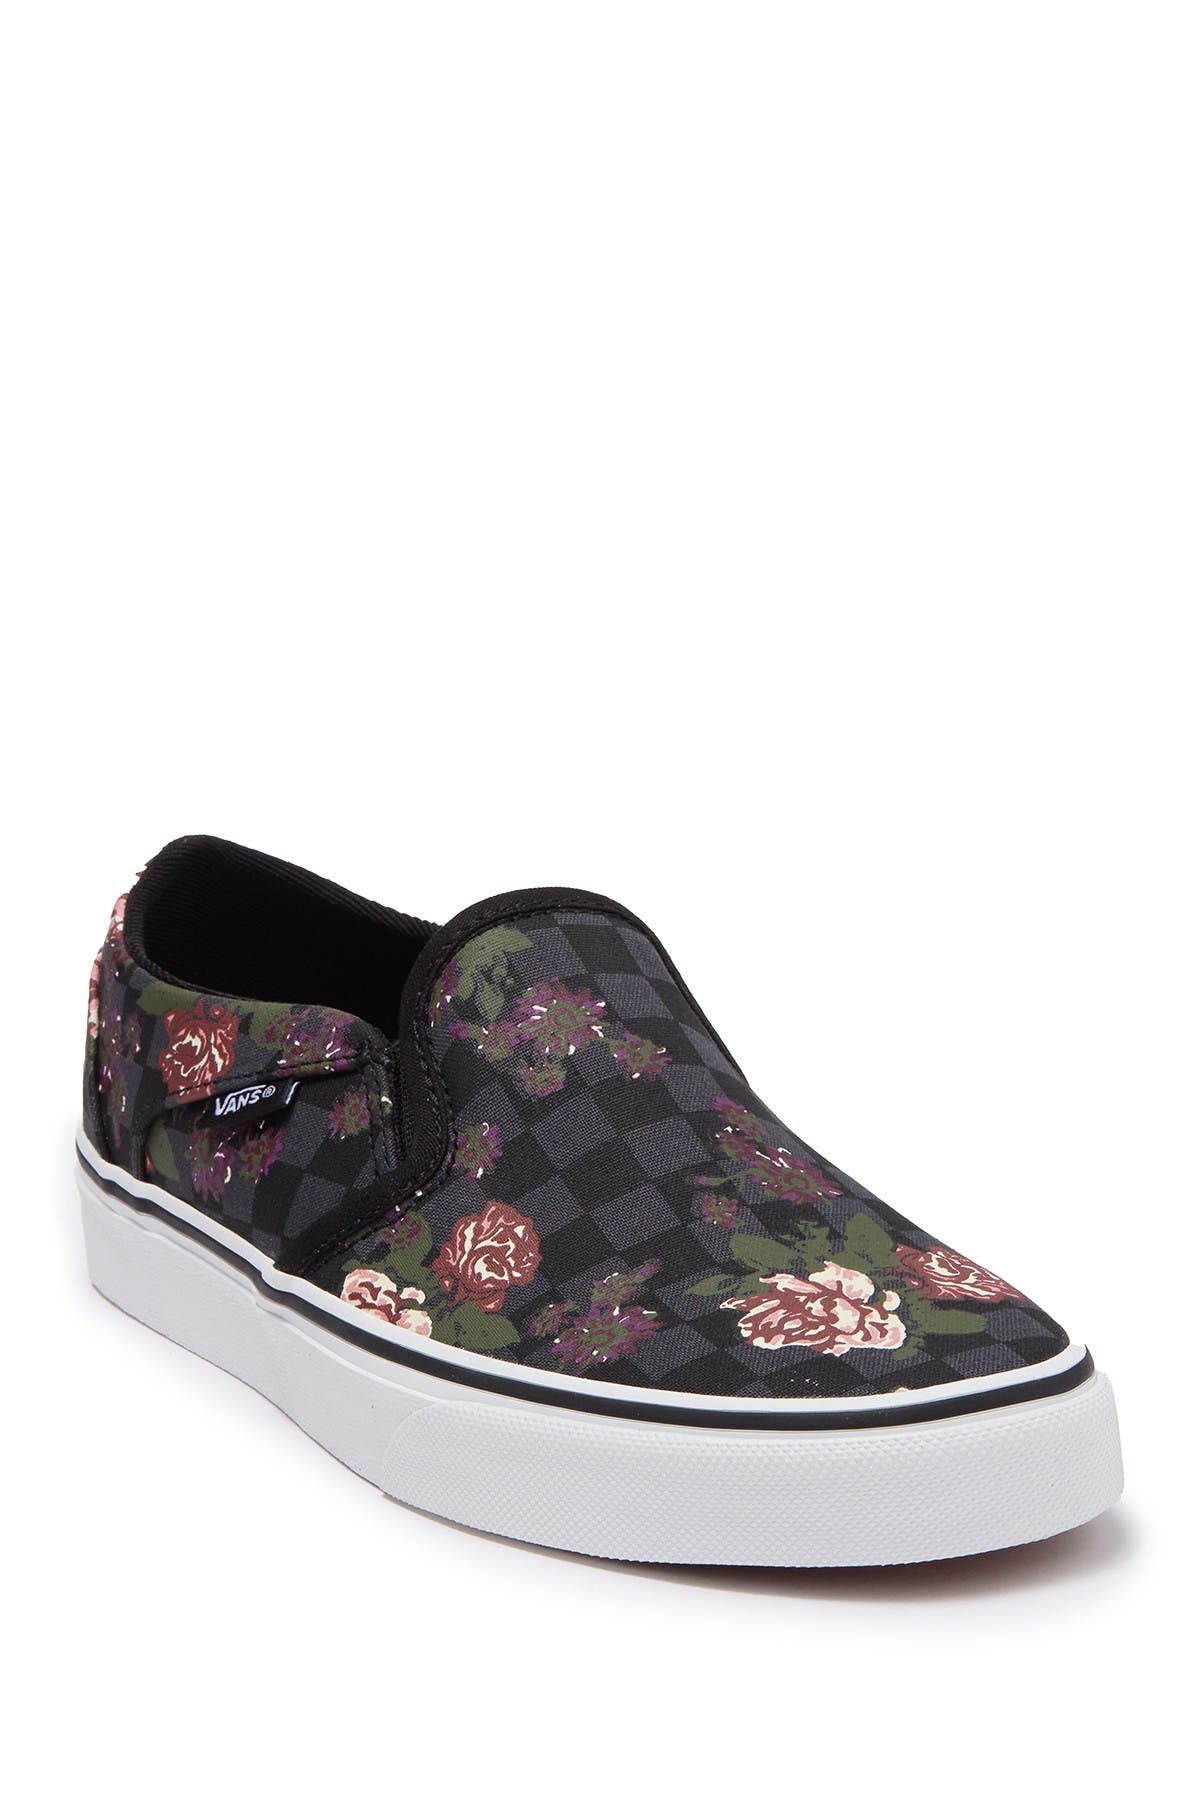 checkerboard vans with flowers